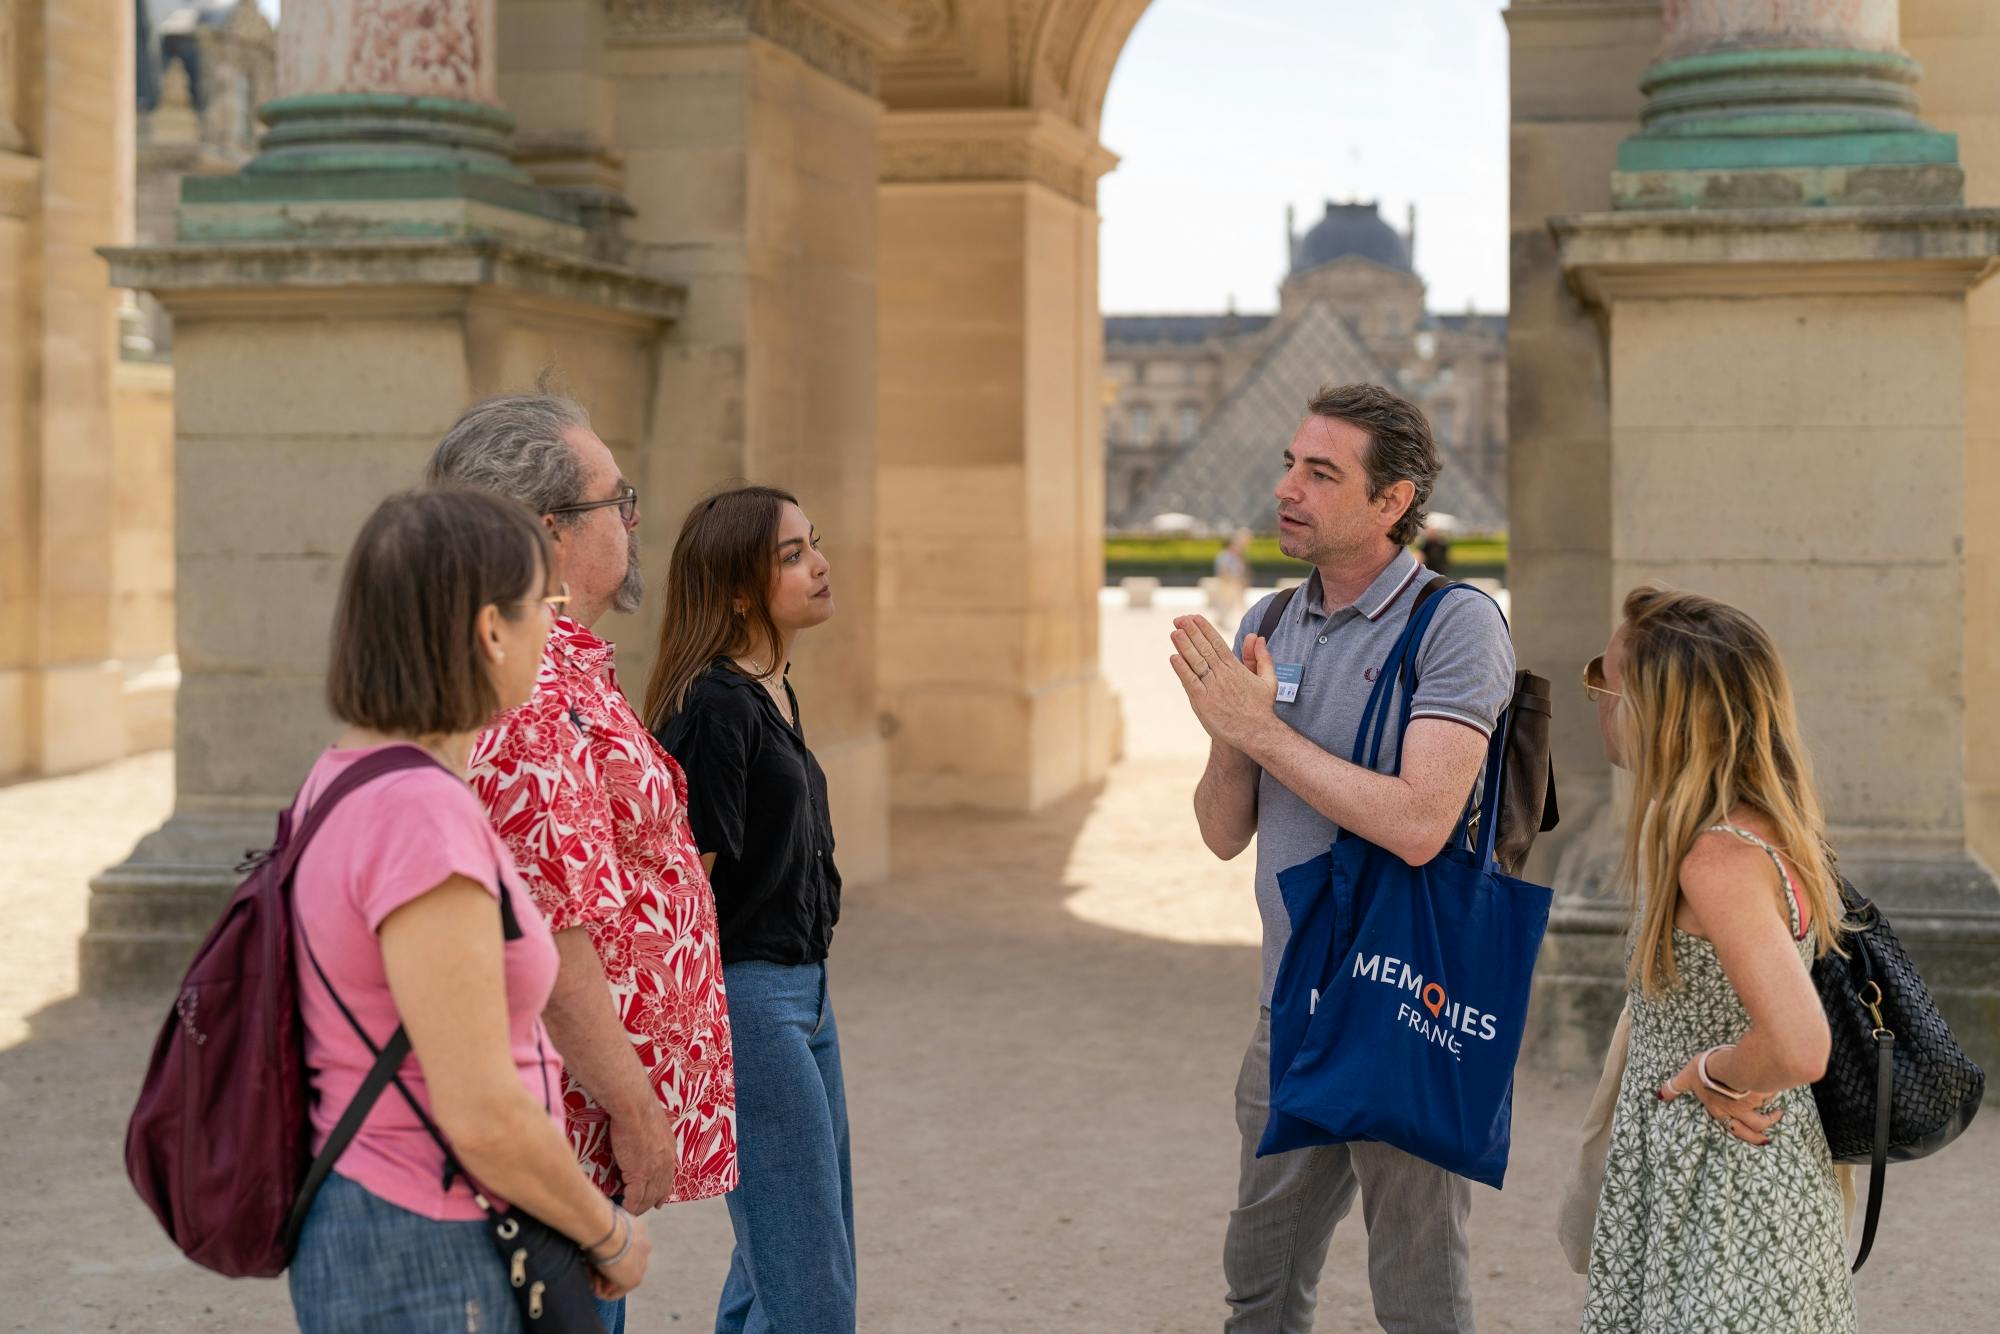 Must-sees of the Louvre Museum guided tour in small group 6 Musement